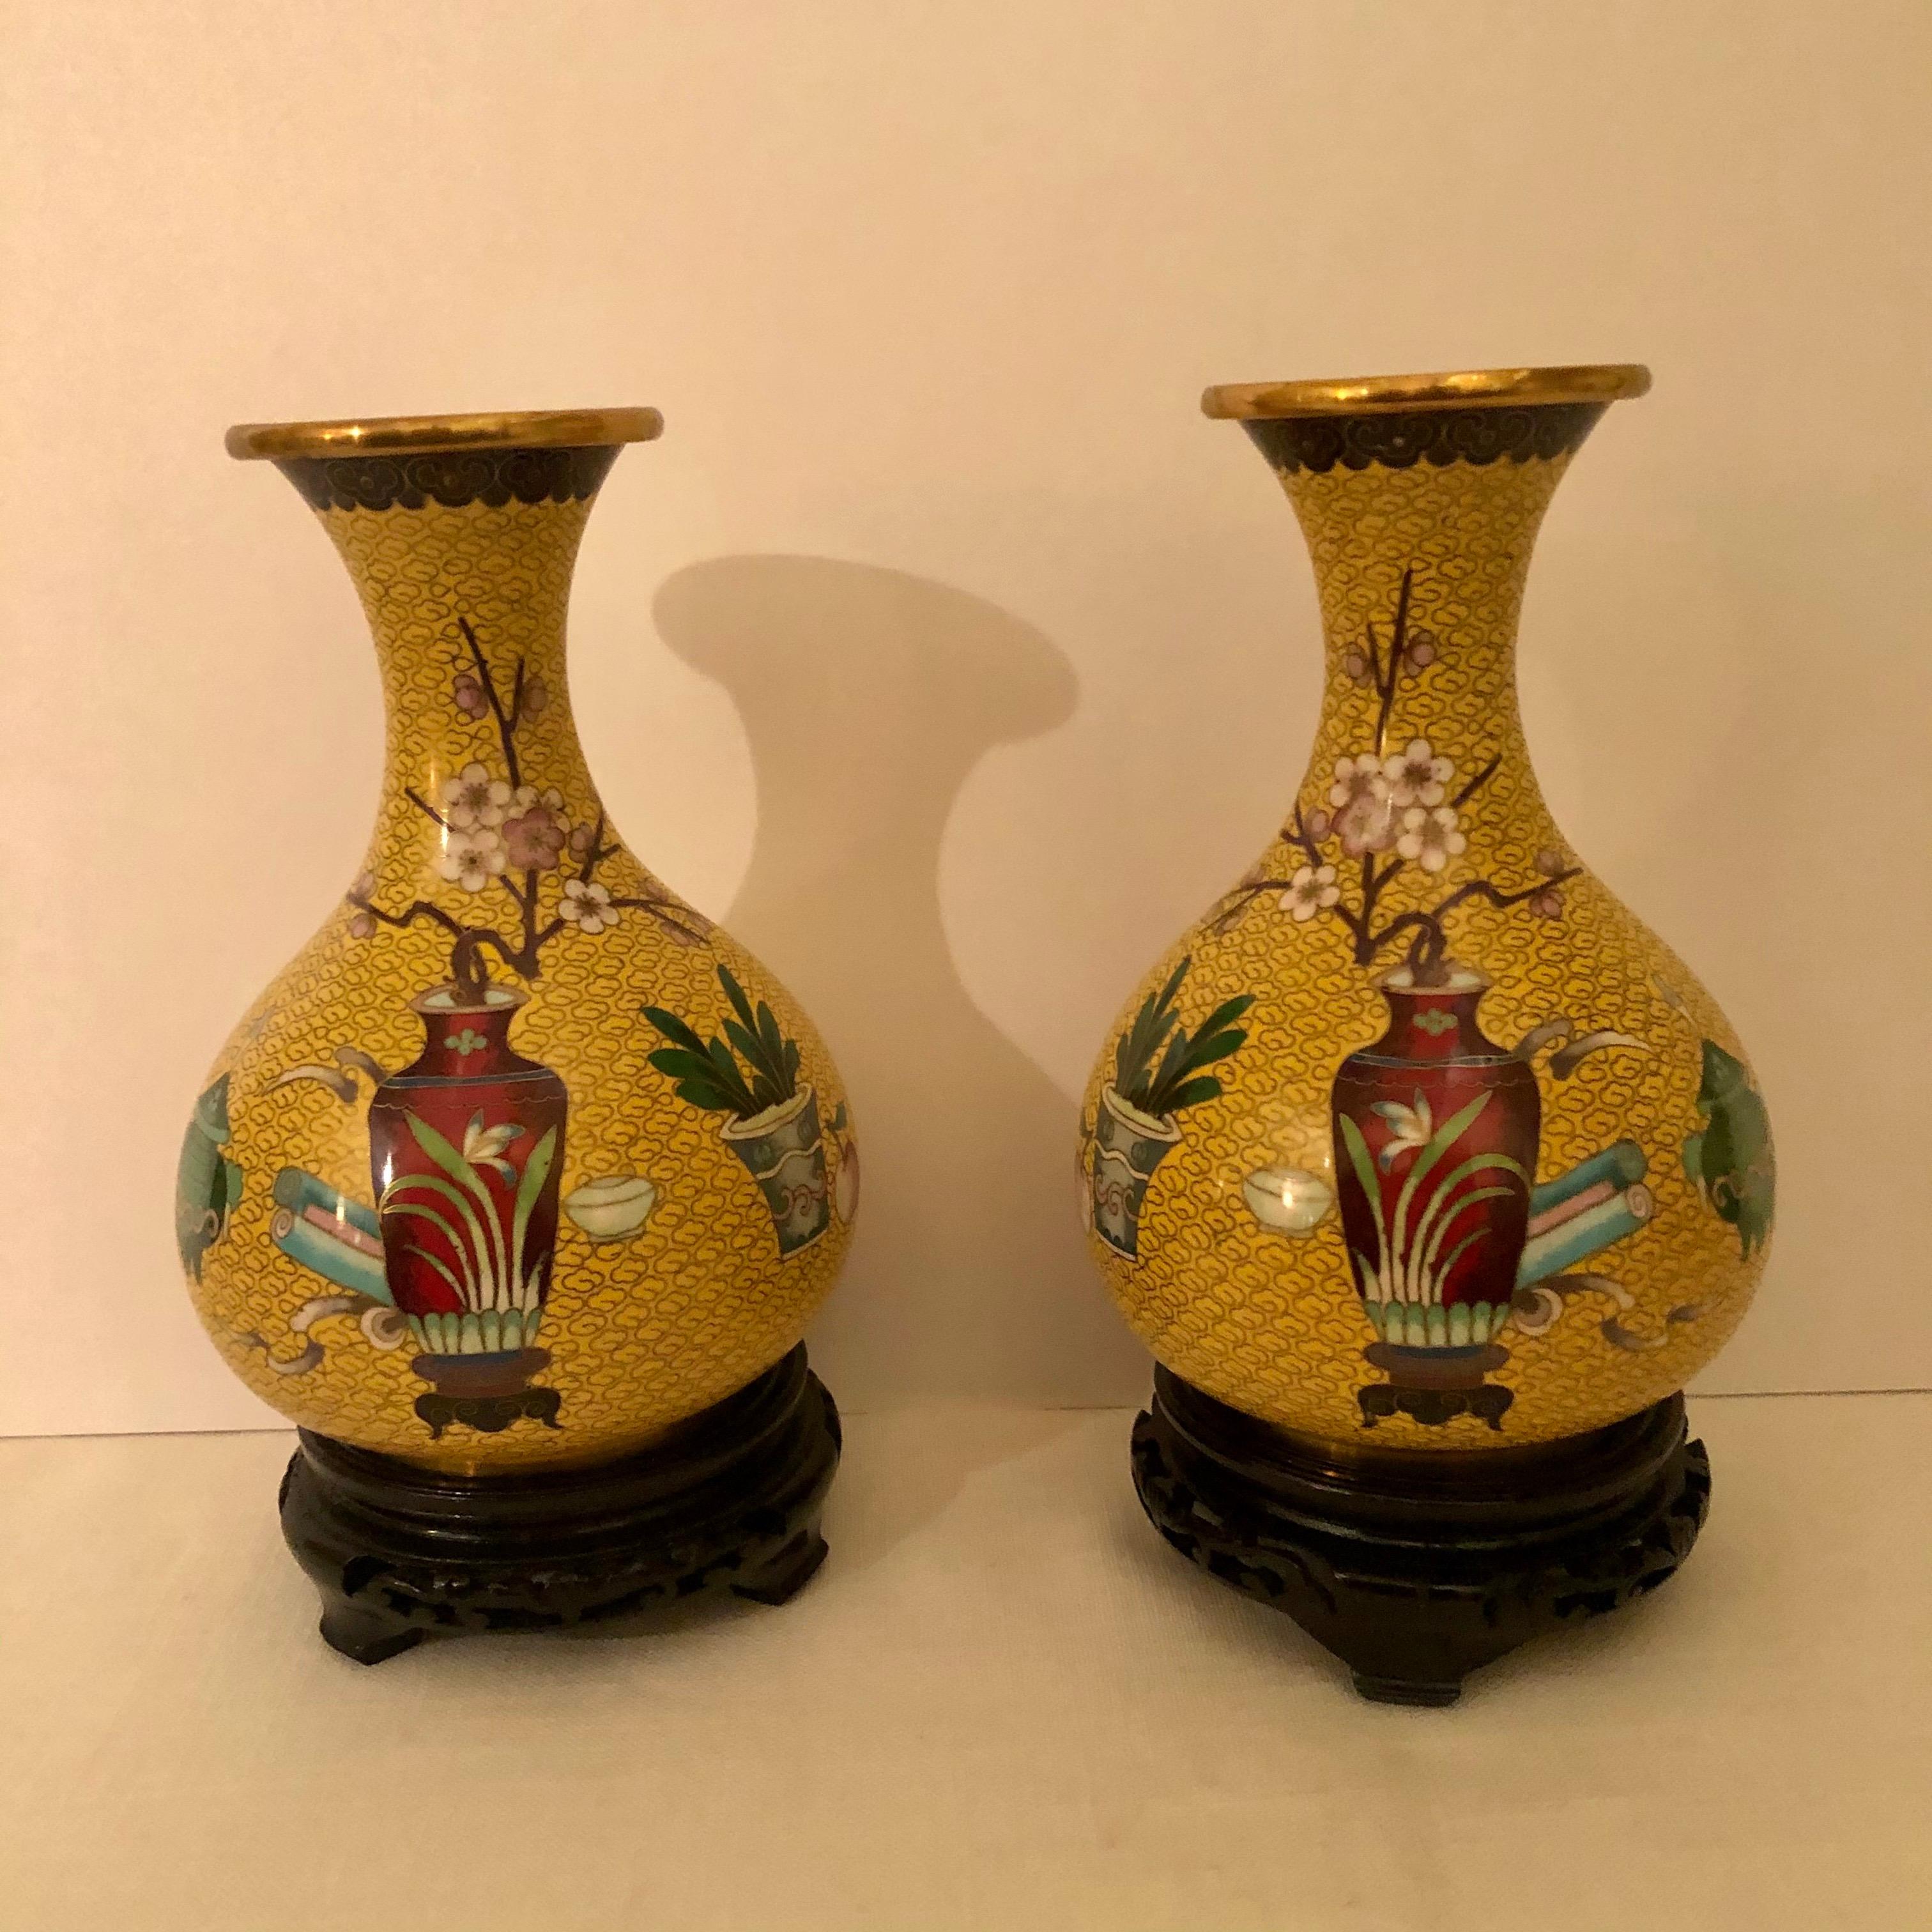 This is a pair of wonderful yellow ground Chinese cloisonné vases. They are each decorated with a red Chinese vase holding Prunus flowers. This decoration stands out against the yellow ground with the cloud decorations all over the vases. They come